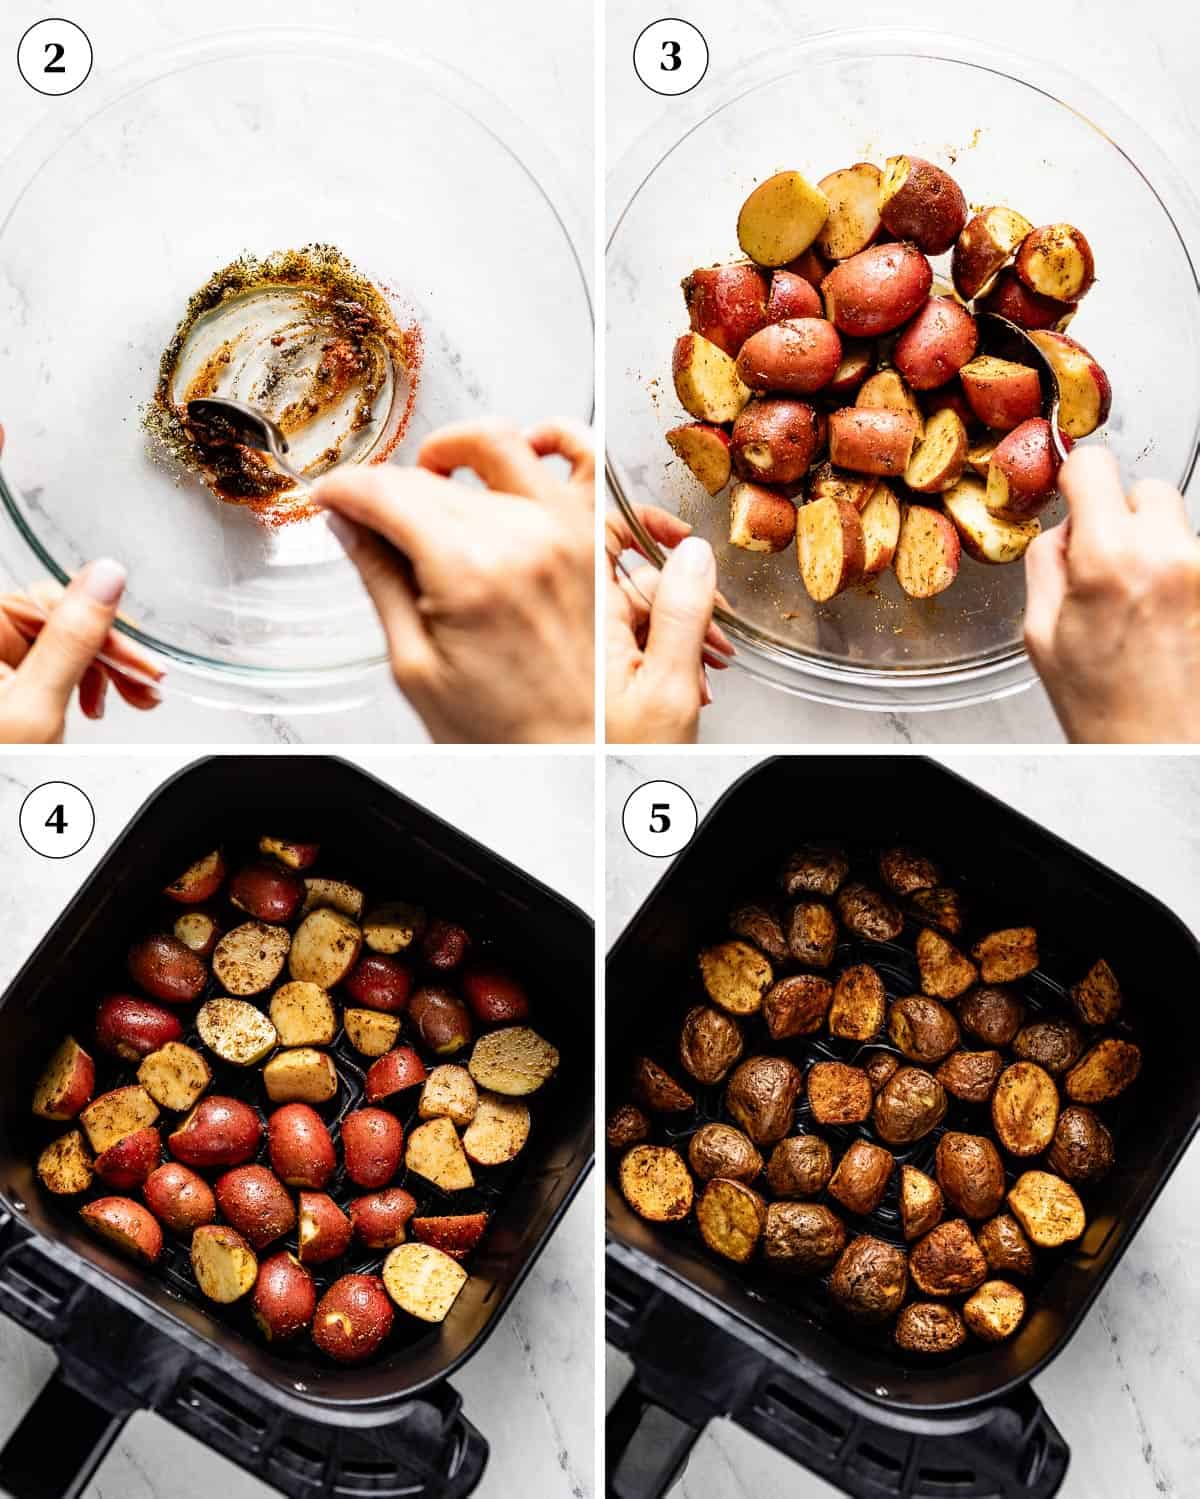 A collage of images showing how to season new potatoes and cook them in the air fryer.